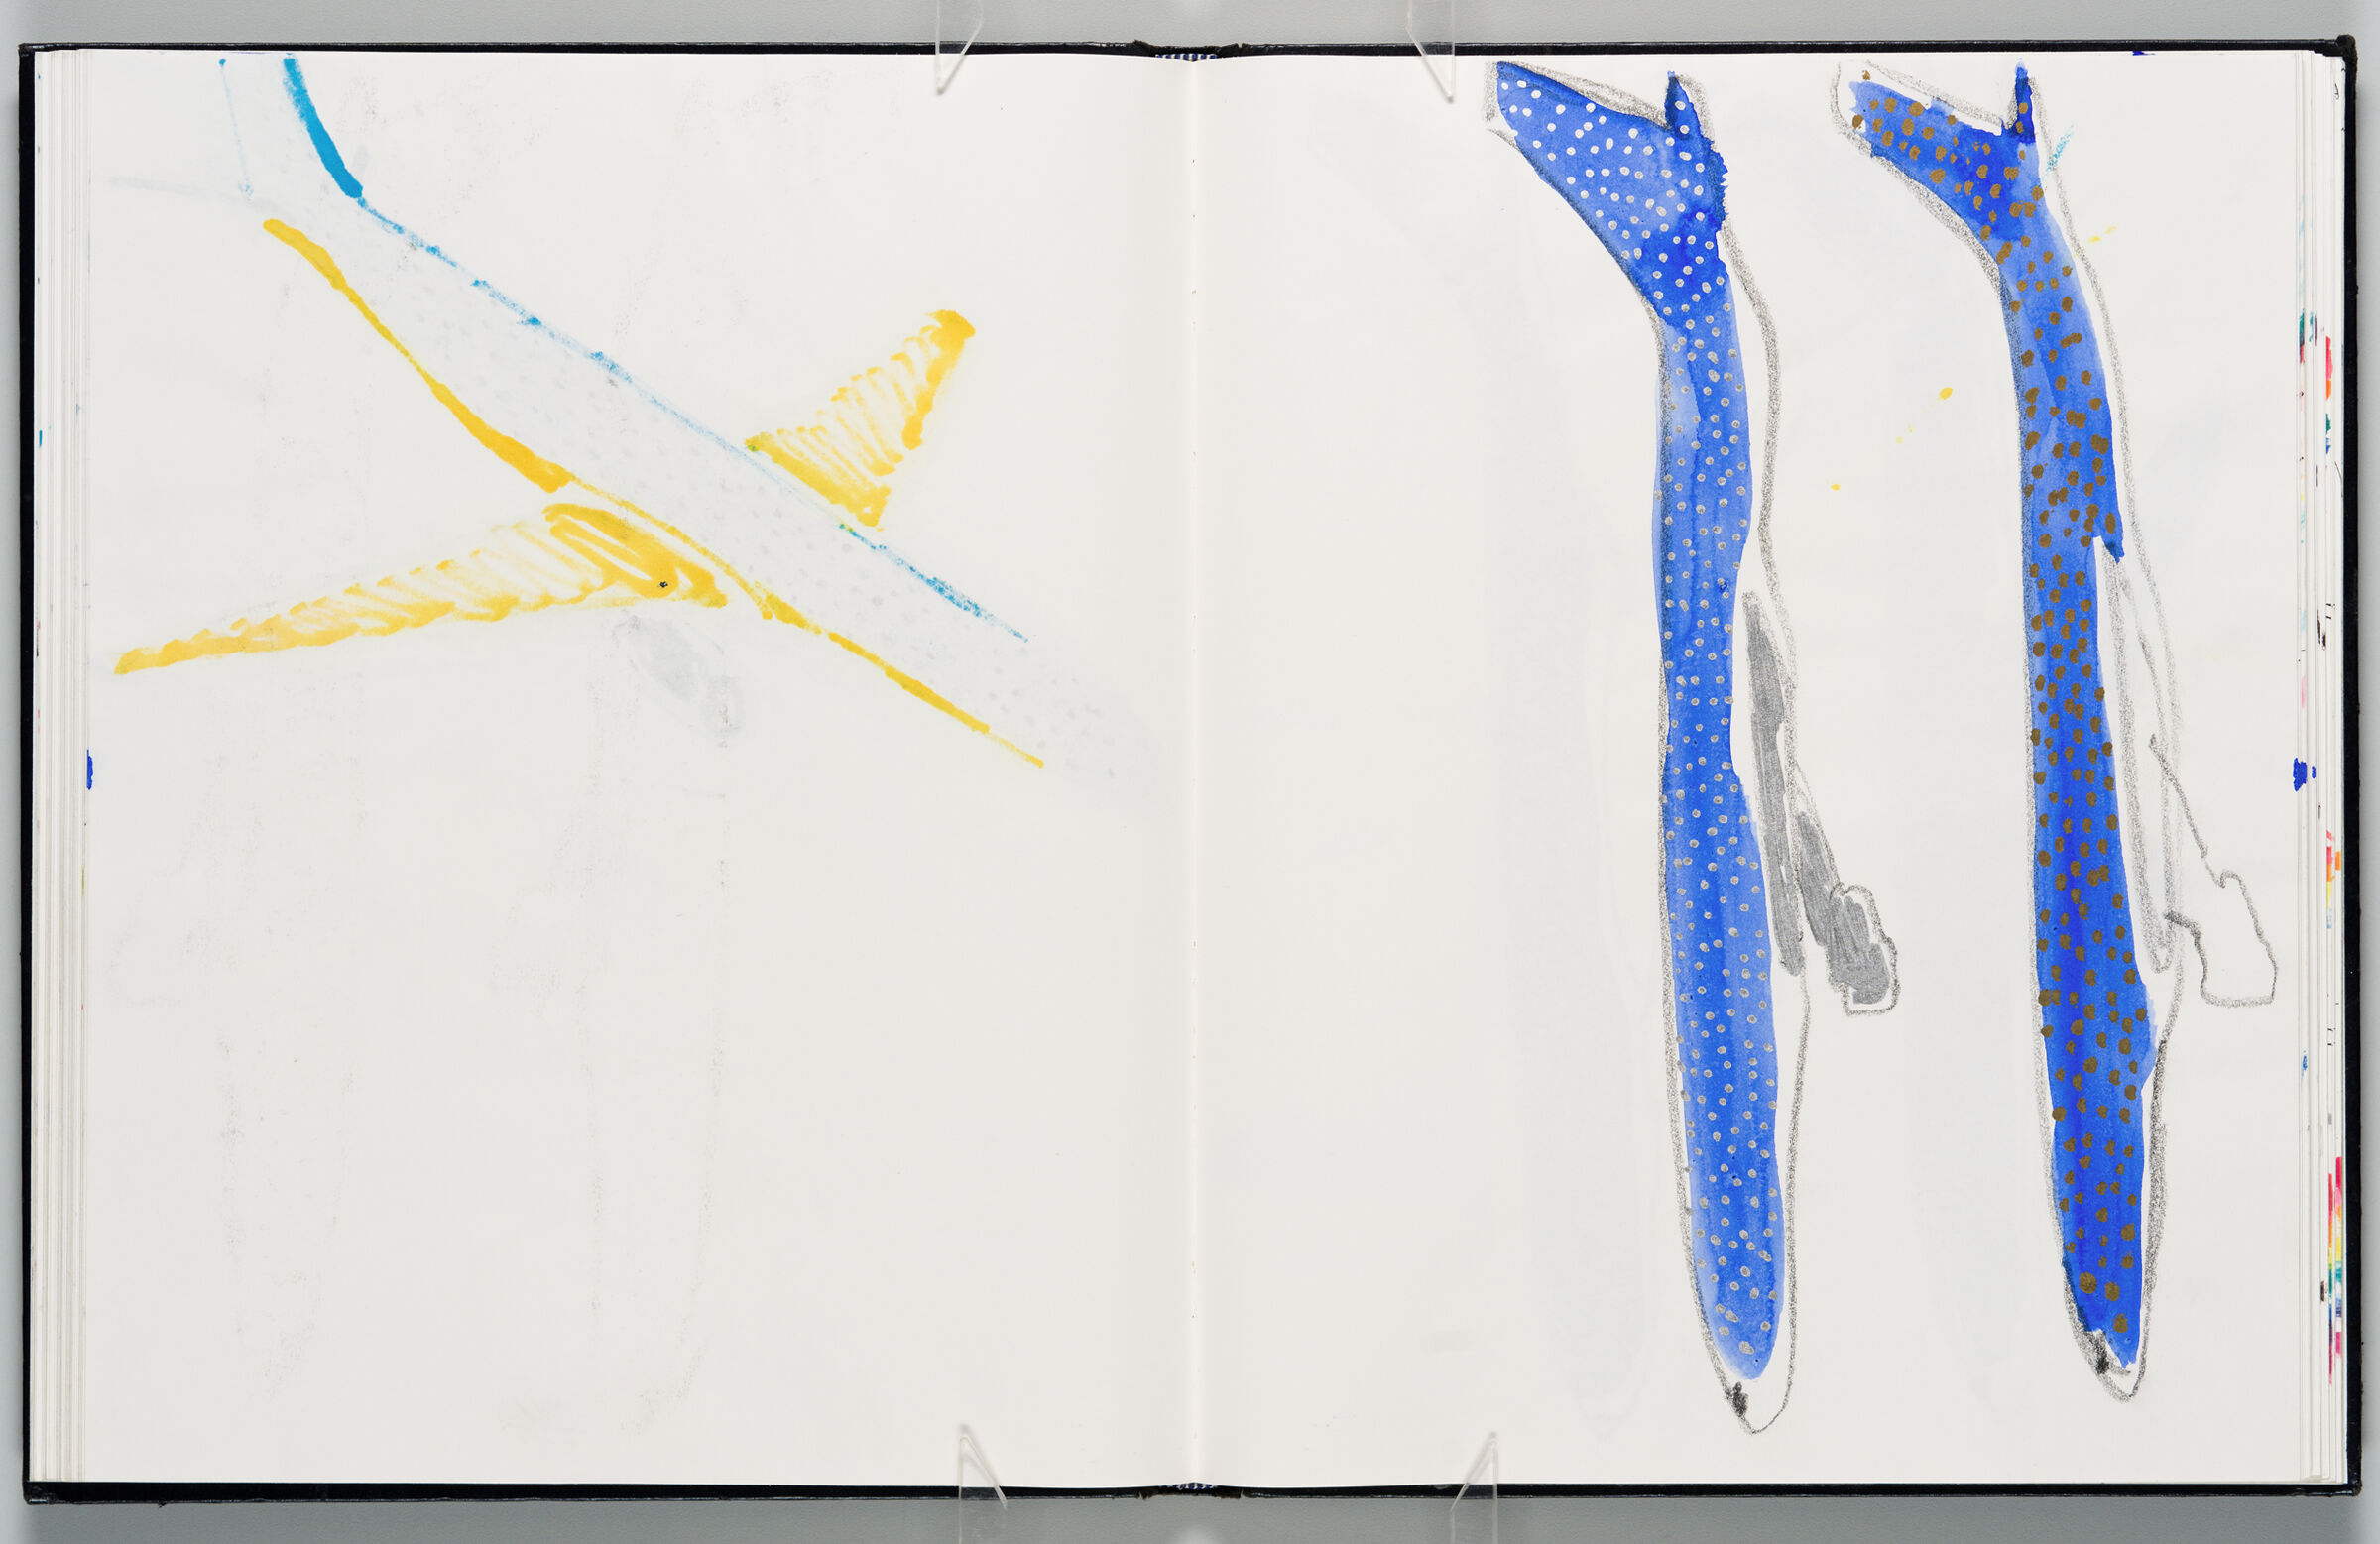 Untitled (Bleed-Through Of Previous Page With Color Transfer, Left Page); Untitled (Starplane Designs For Condor, Right Page)